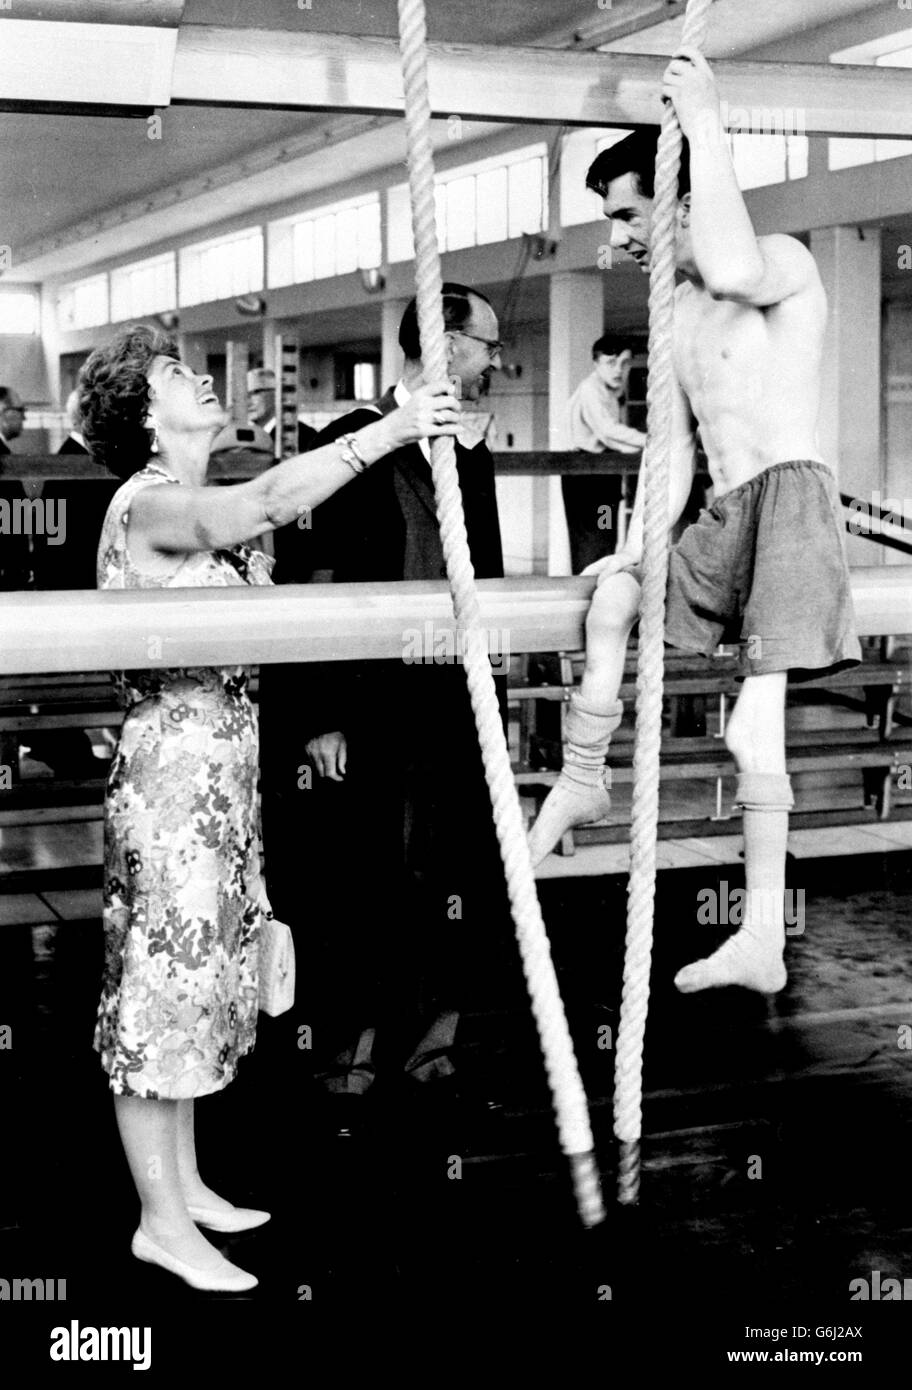 Queen Frederika of Greece smiles encouragingly at David Bonnett as he climbs a rope in the gymnasium during her visit to the Lord Mayor Treloar College for Disabled Boys at Upper Froyle, near Alton, Hampshire. She spent more than an hour visiting the classrooms and workshops. With her husband, Queen Frederika is on a State visit to Britain. Stock Photo